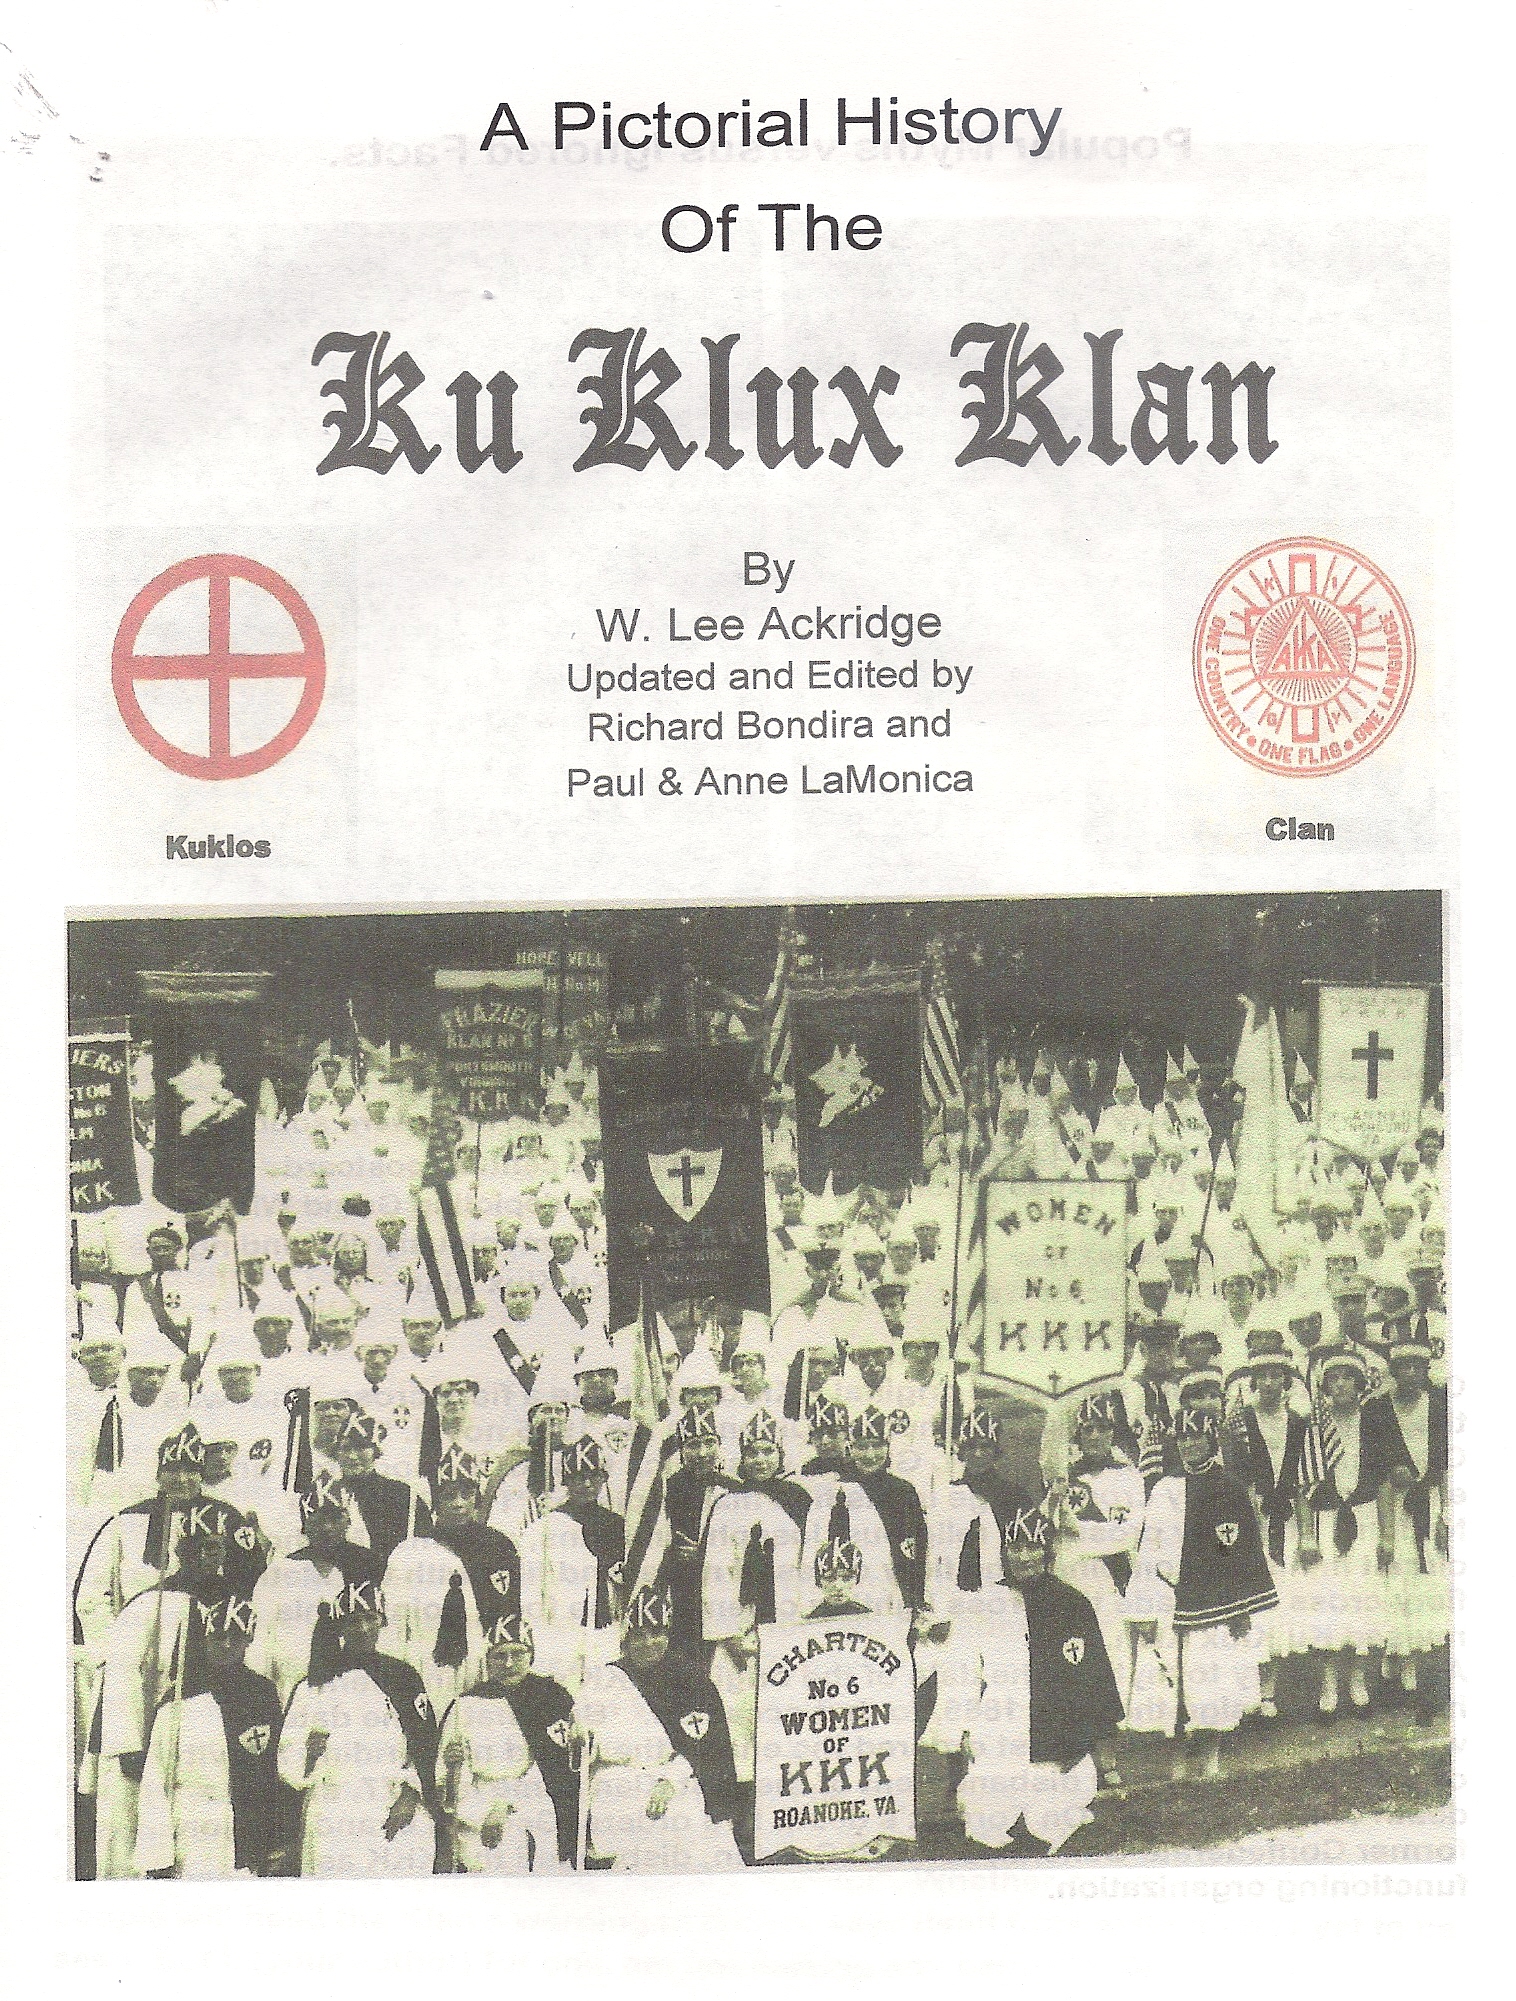 Pictorial History of the Klan